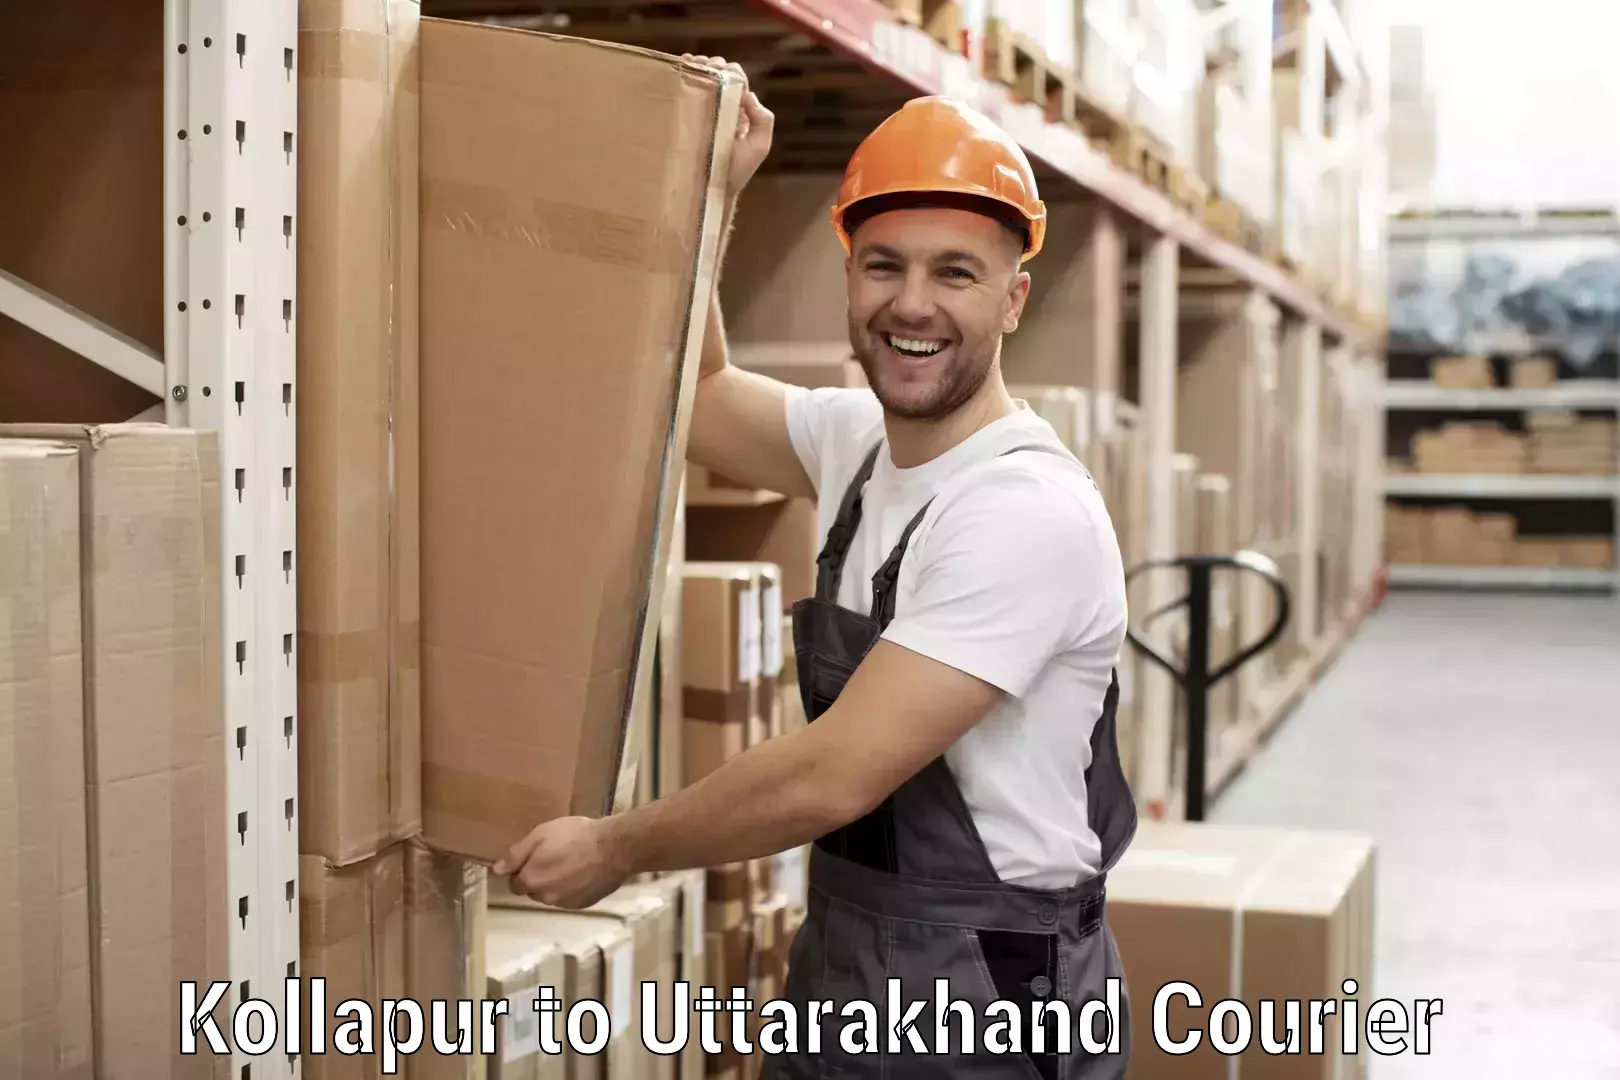 State-of-the-art courier technology Kollapur to Baijnath Bageshwar